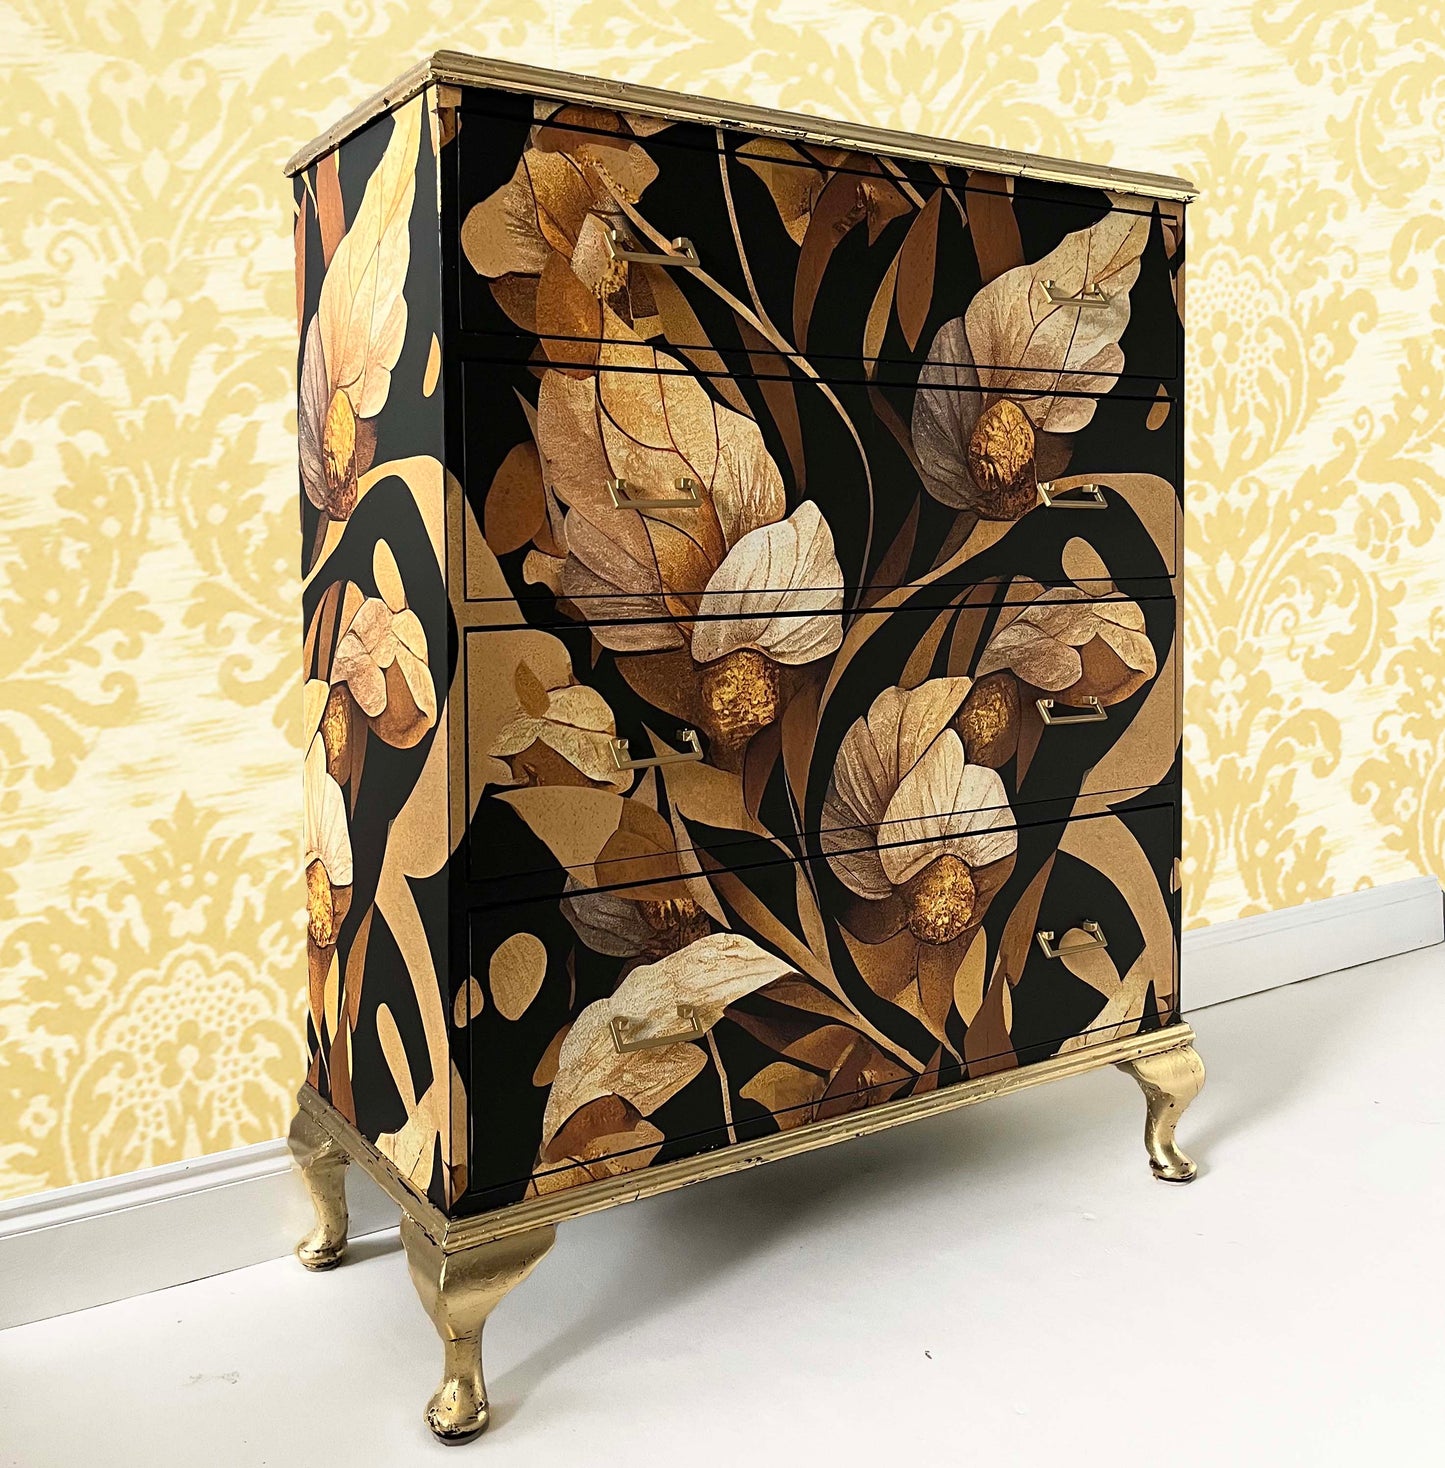 Antique chest of drawers with gold floral pattern